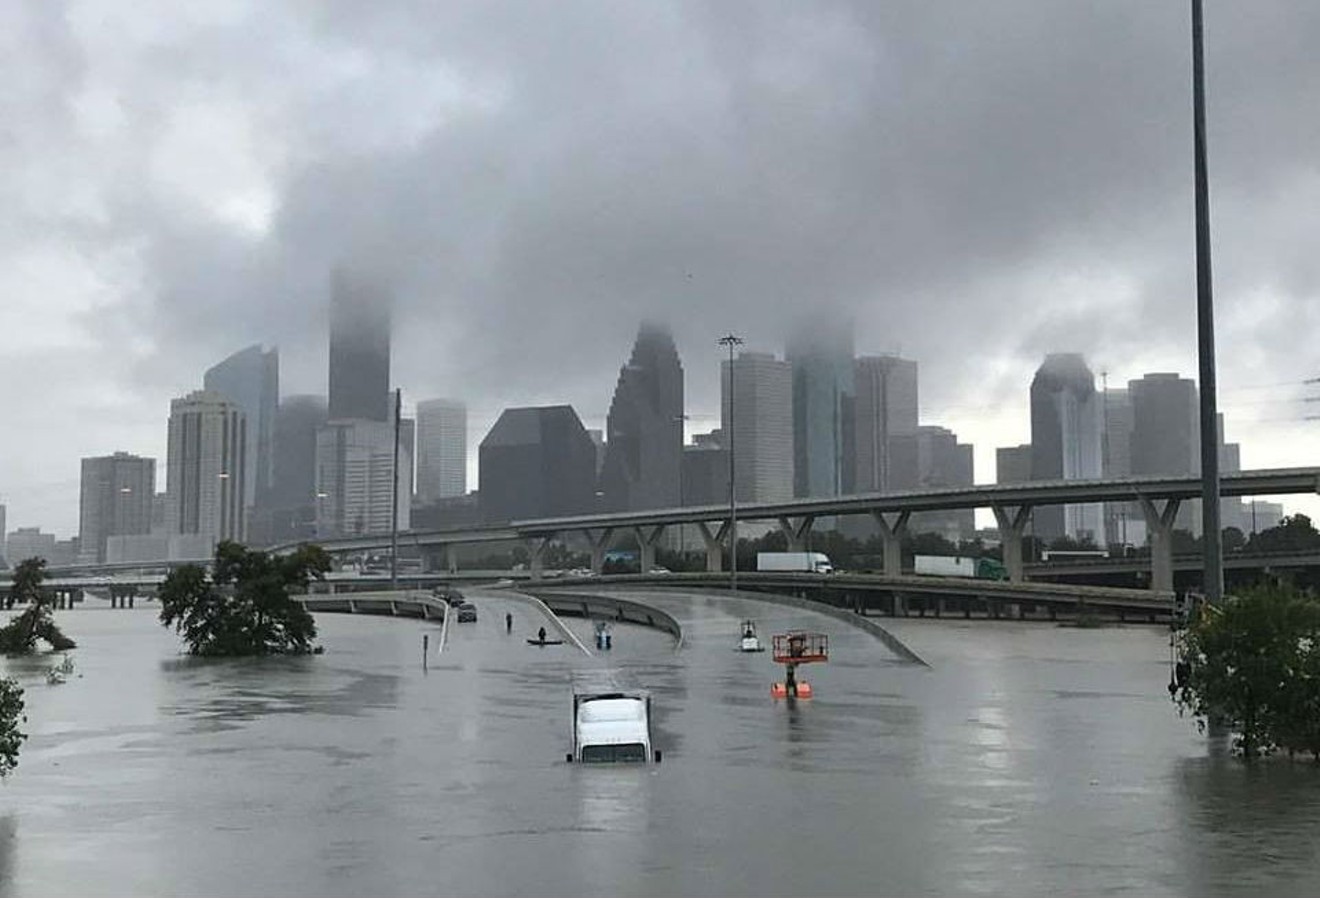 Harvey has devastated parts of South Texas, including Houston, where extreme flooding continues days after the storm's landfall.